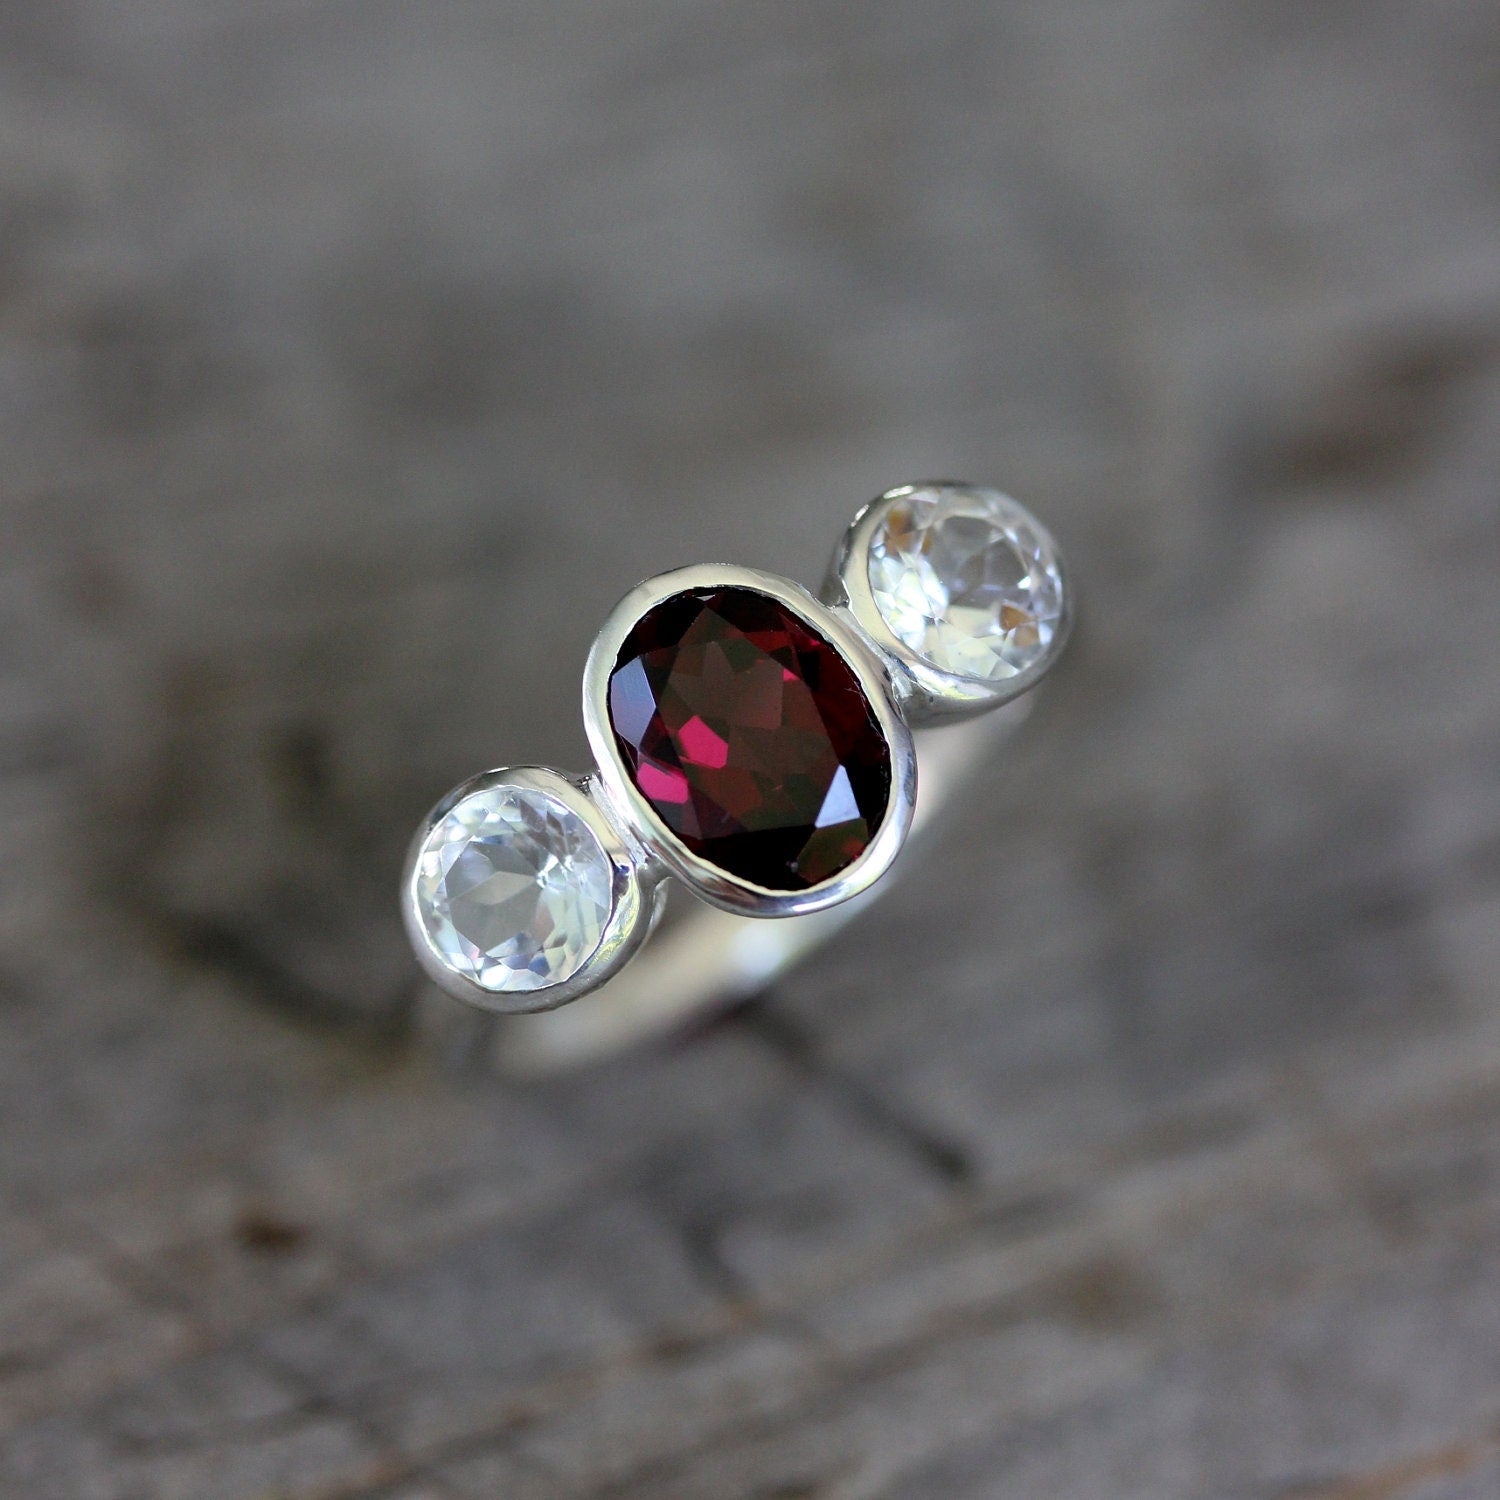 A Handmade Pink Garnet Ring with white diamonds by Cassin Jewelry.